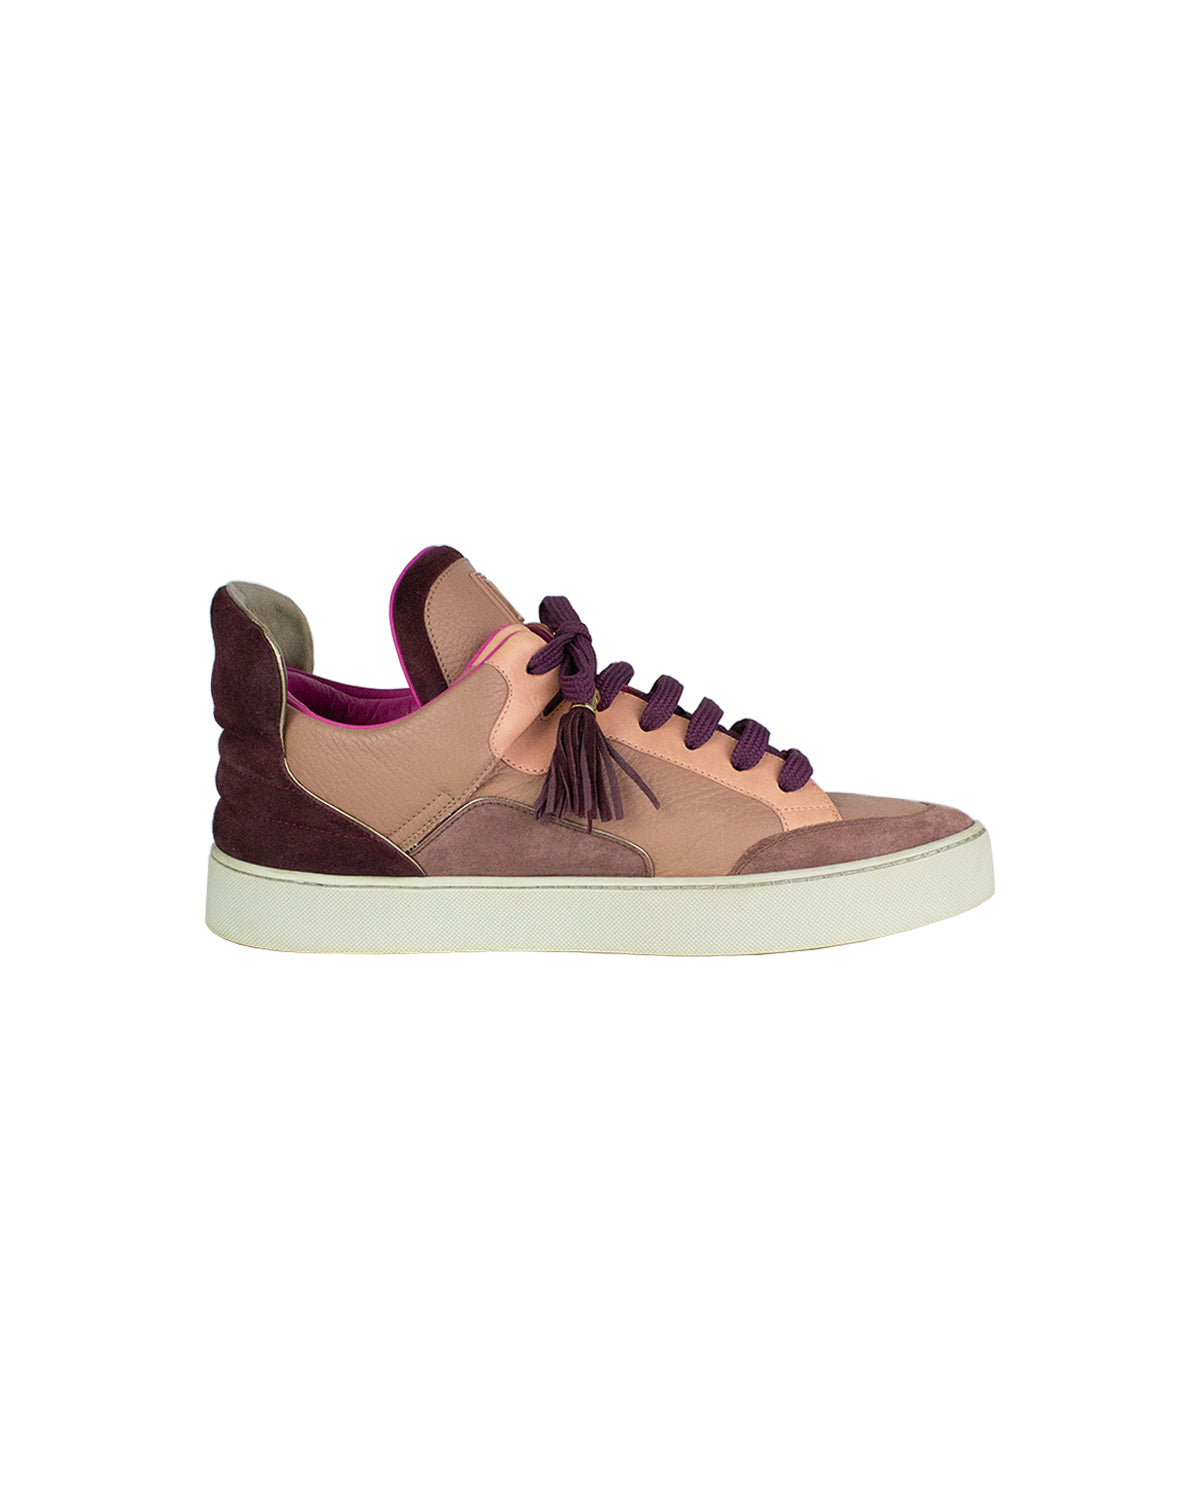 Louis Vuitton x Kanye West Don 'Patchwork' Sneakers - Brown